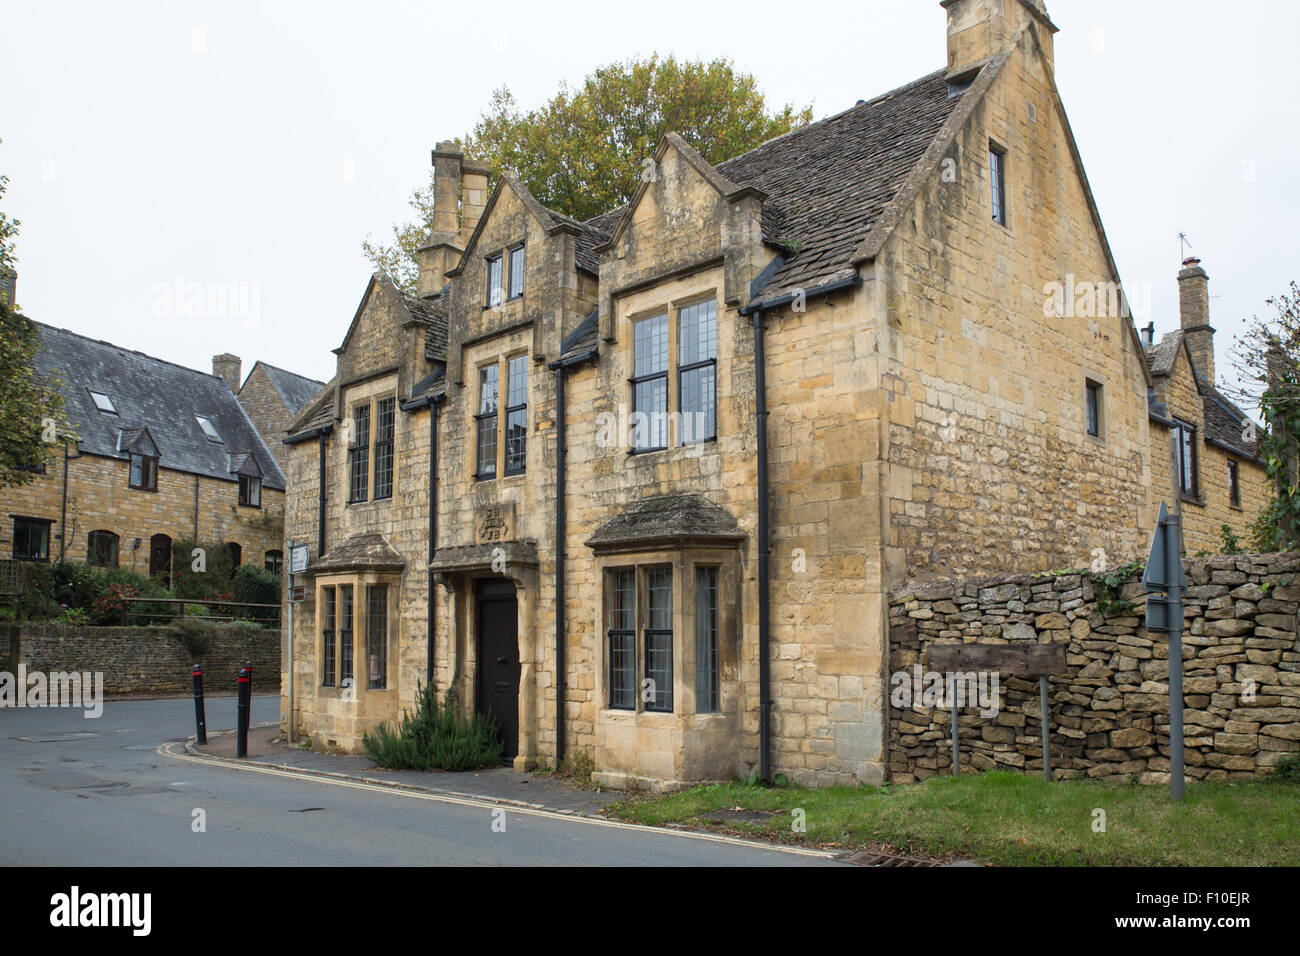 Typical architecture on old stone house in Cotswolds in English countryside Stock Photo